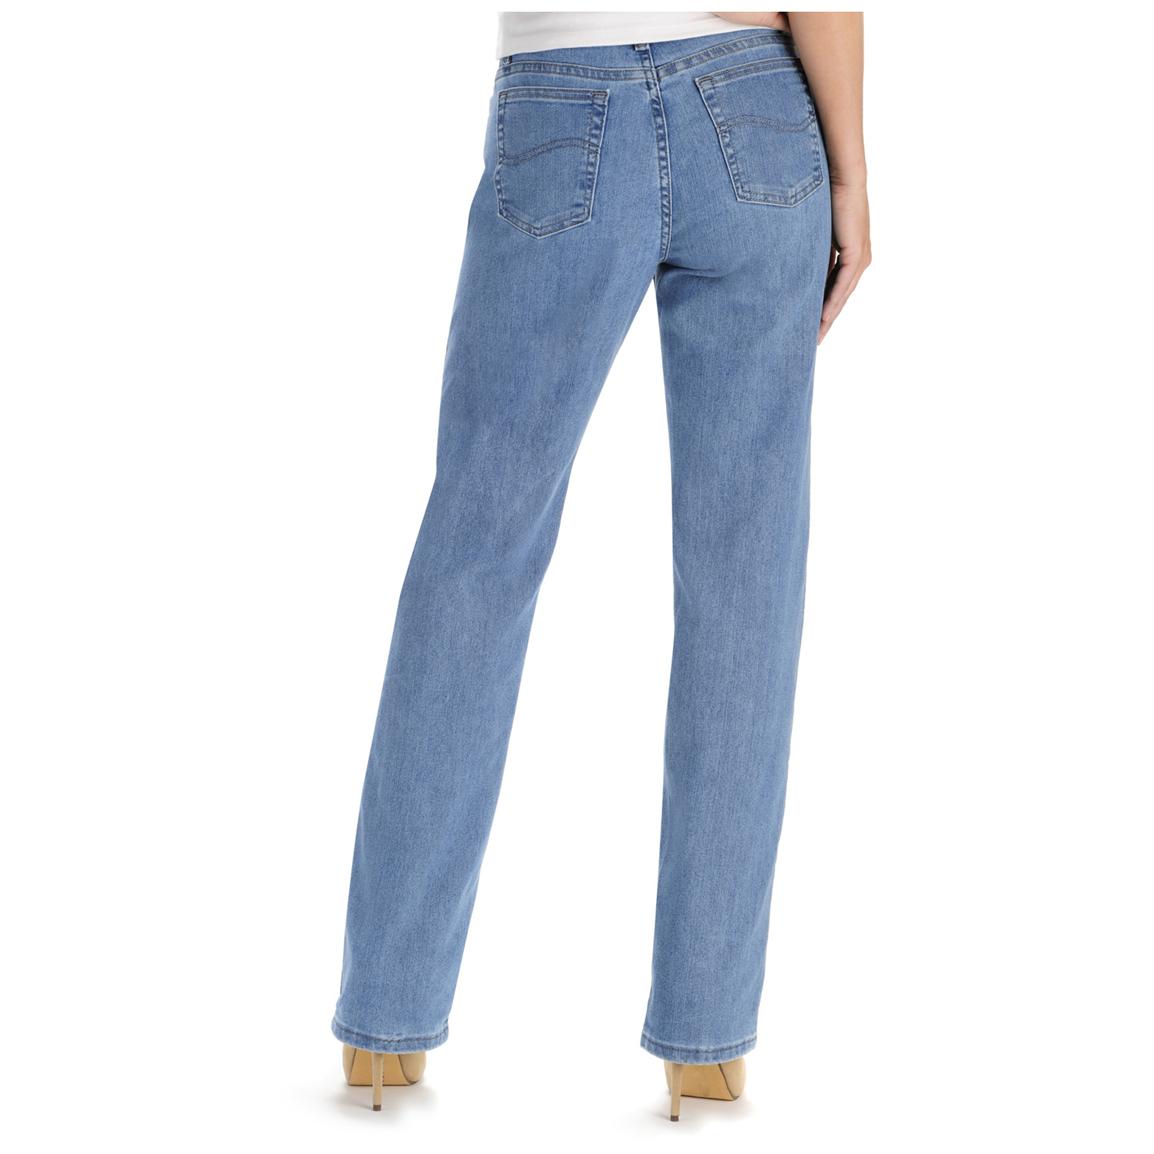 Women’s Relaxed Fit Jeans